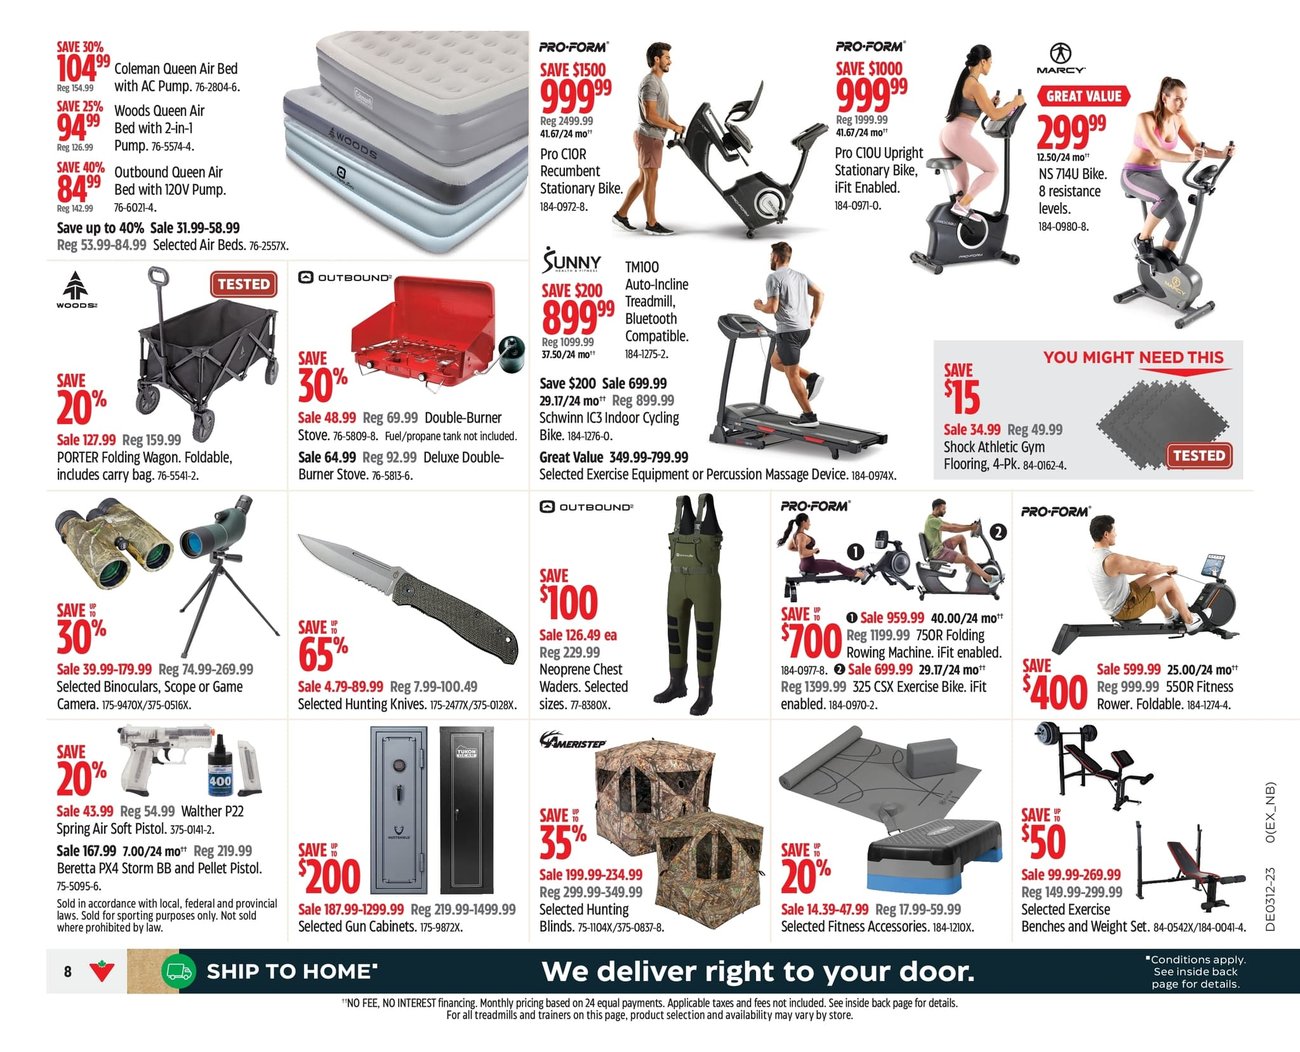 Canadian Tire - Weekly Flyer Specials - Page 10